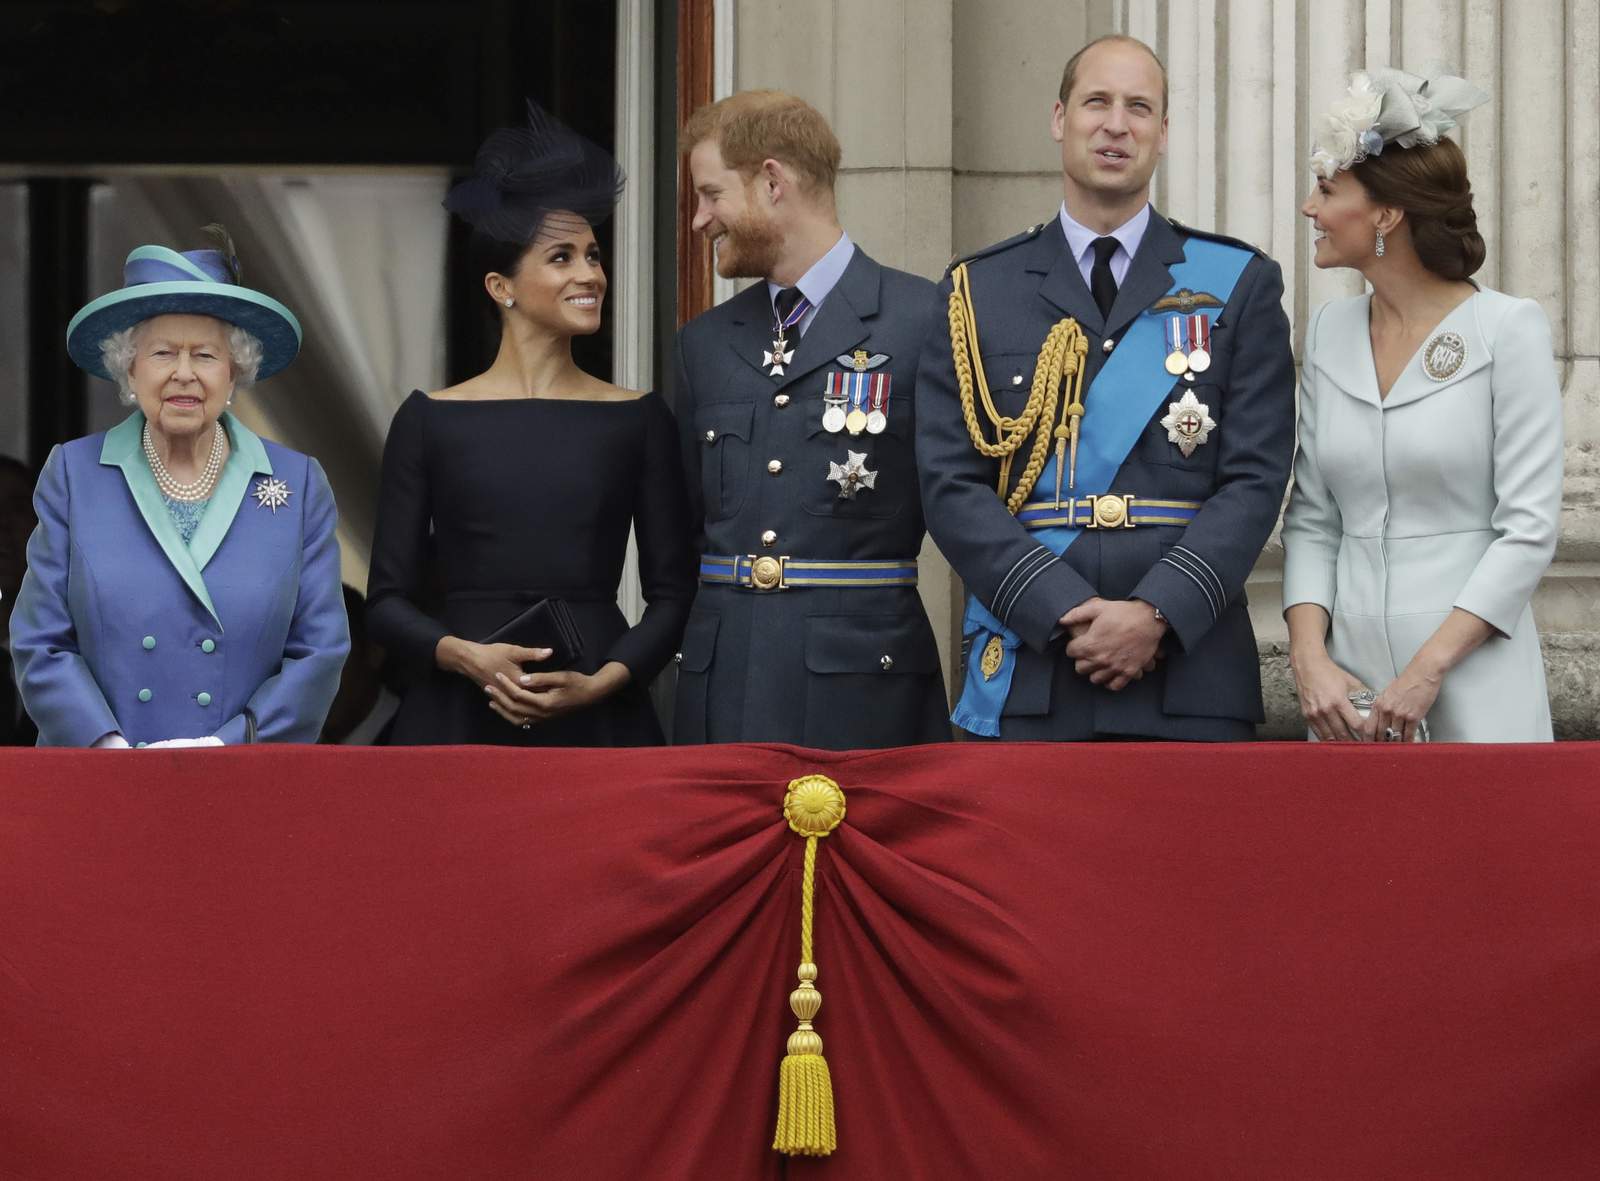 Royal funeral offers chance for William, Harry to reconcile